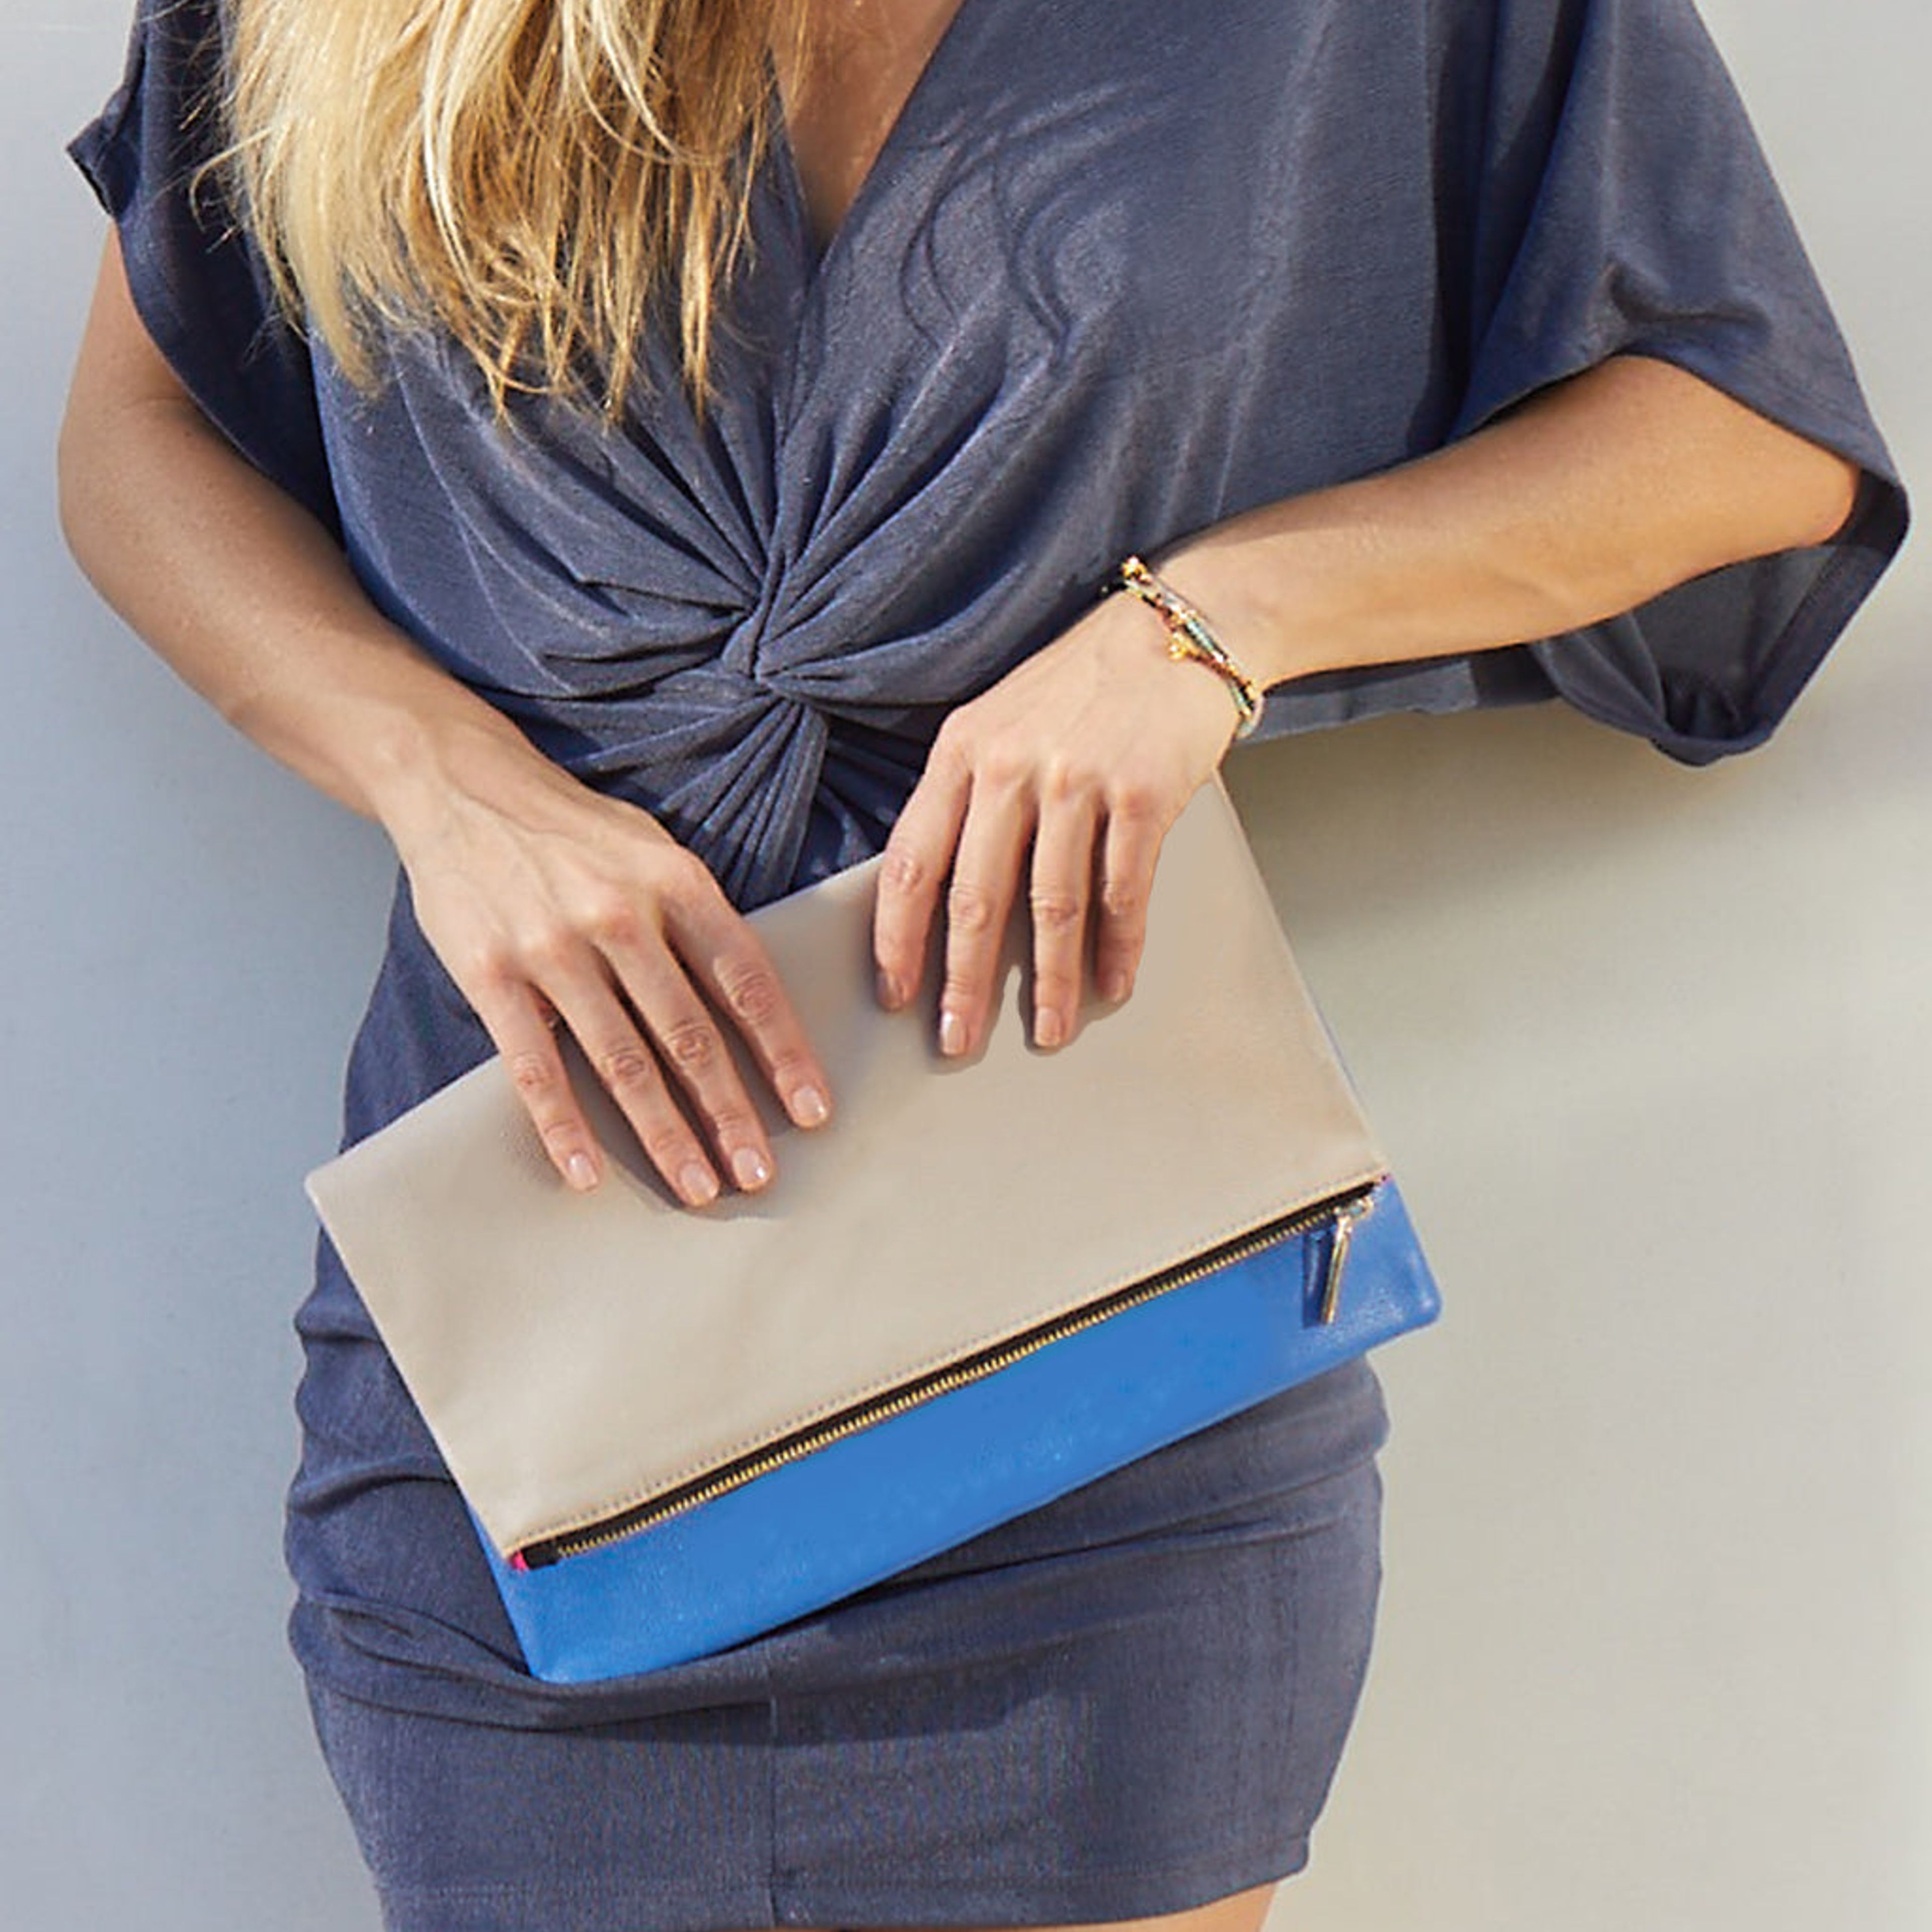 Blue & Taupe Reversible Clutch